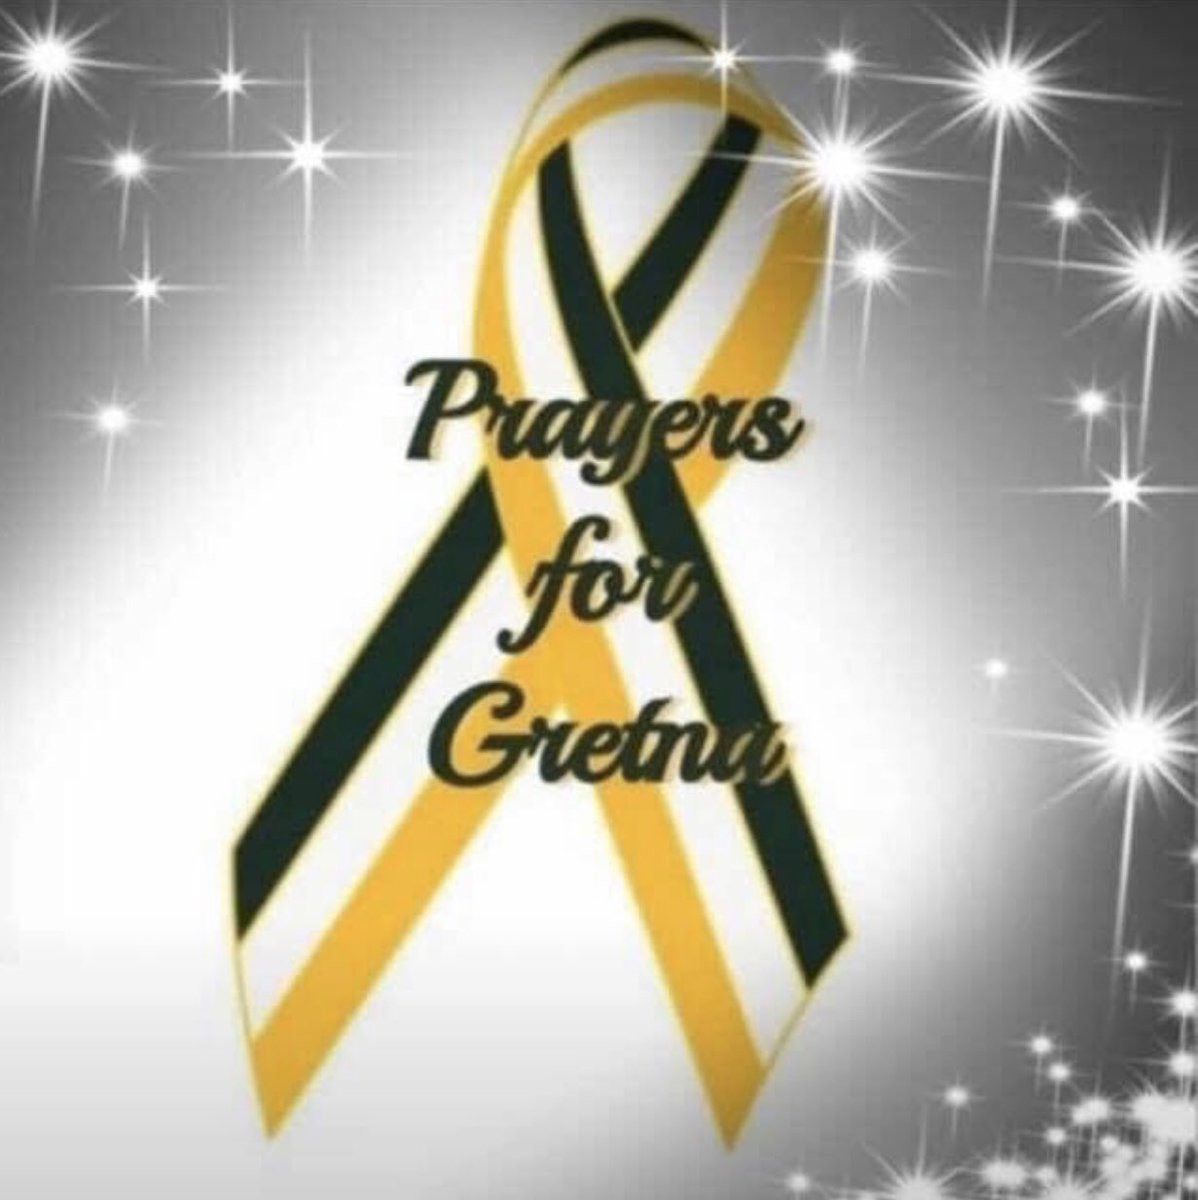 Hitting too close to home tonight! Prayers with all 5 families and the Gretna community. 🙏🏻 💛💚
#OnceADragonAlwaysADragon